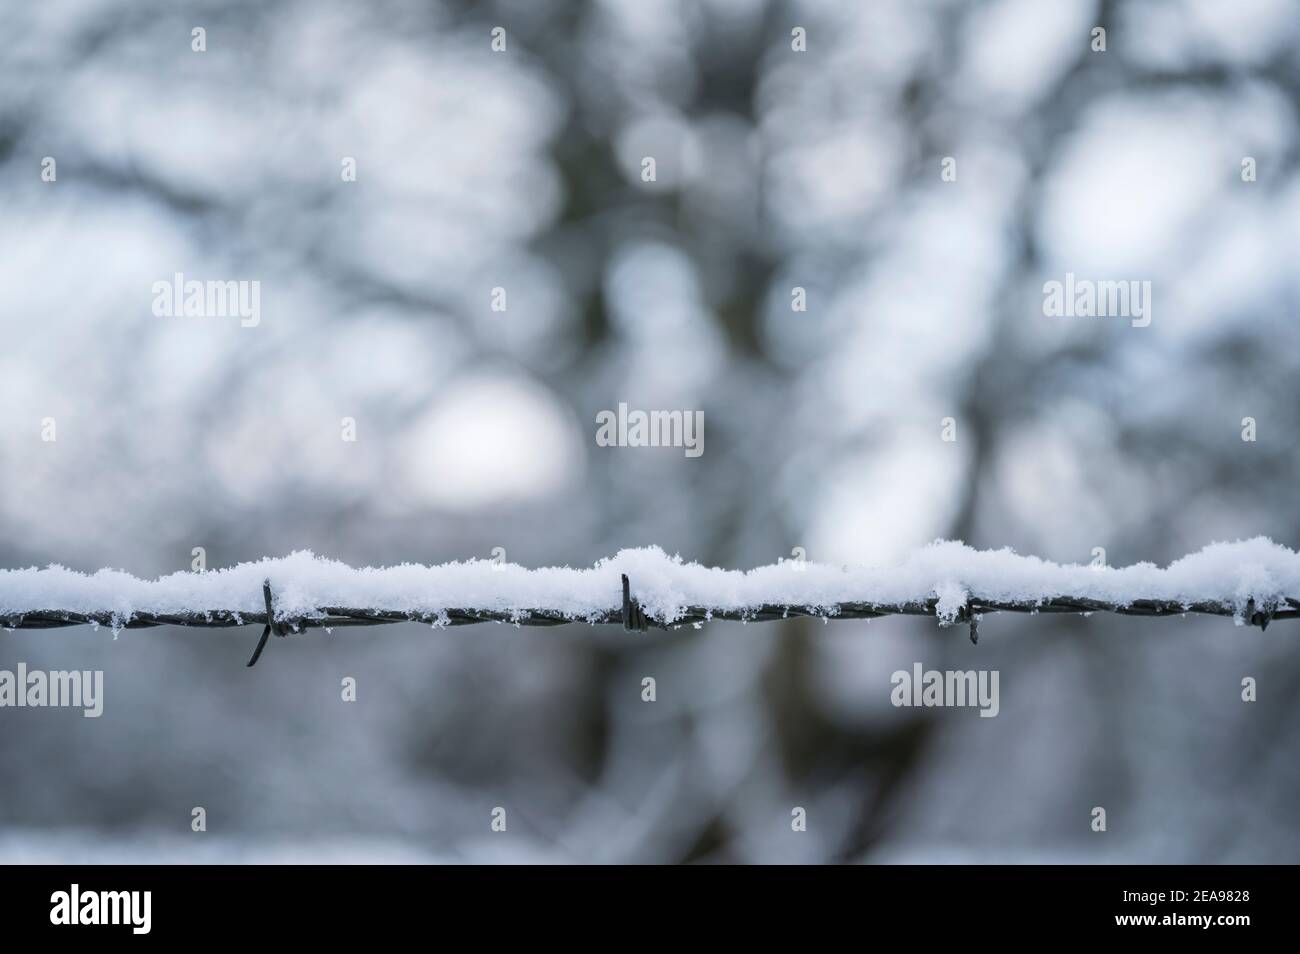 Snow on barbed wire bordering a farm field, Hexham, Northumberland, England Stock Photo